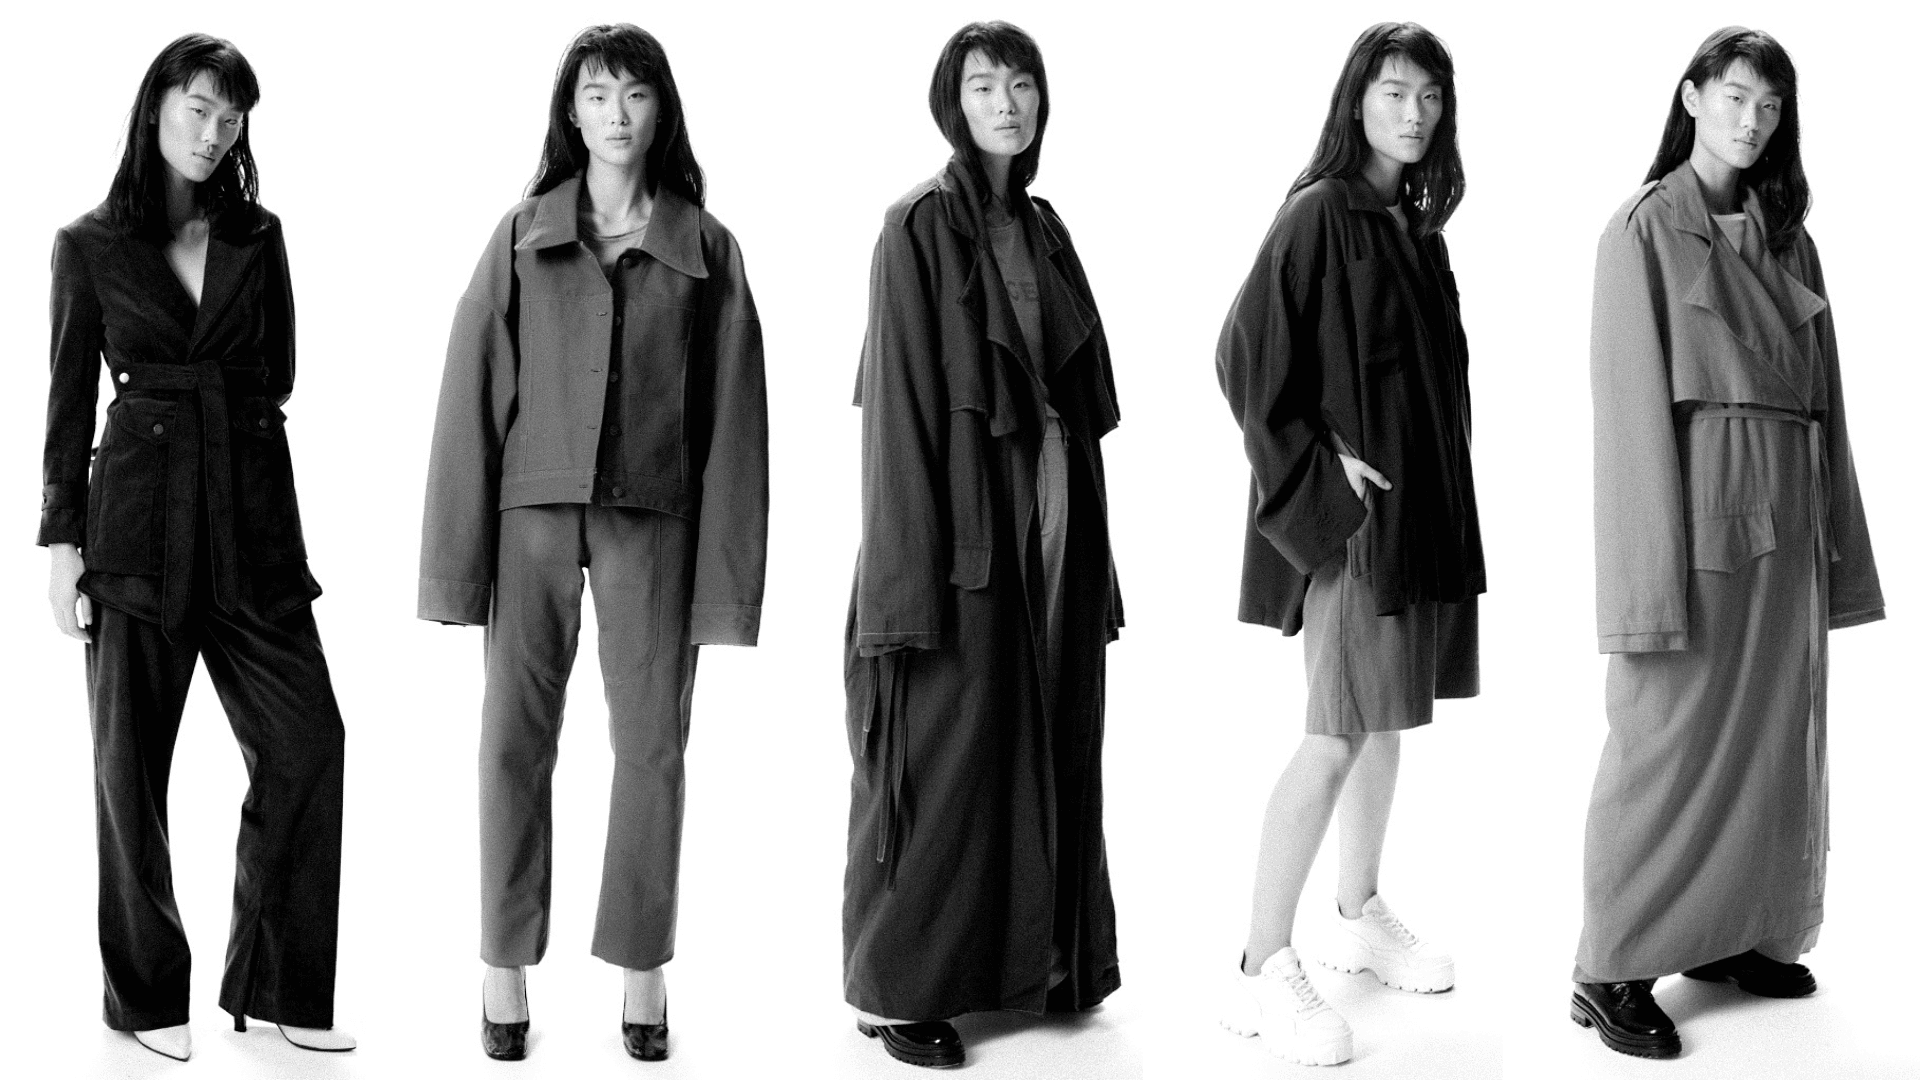 A collage of a model in various poses wearing a series of chic monochromatic outfits.